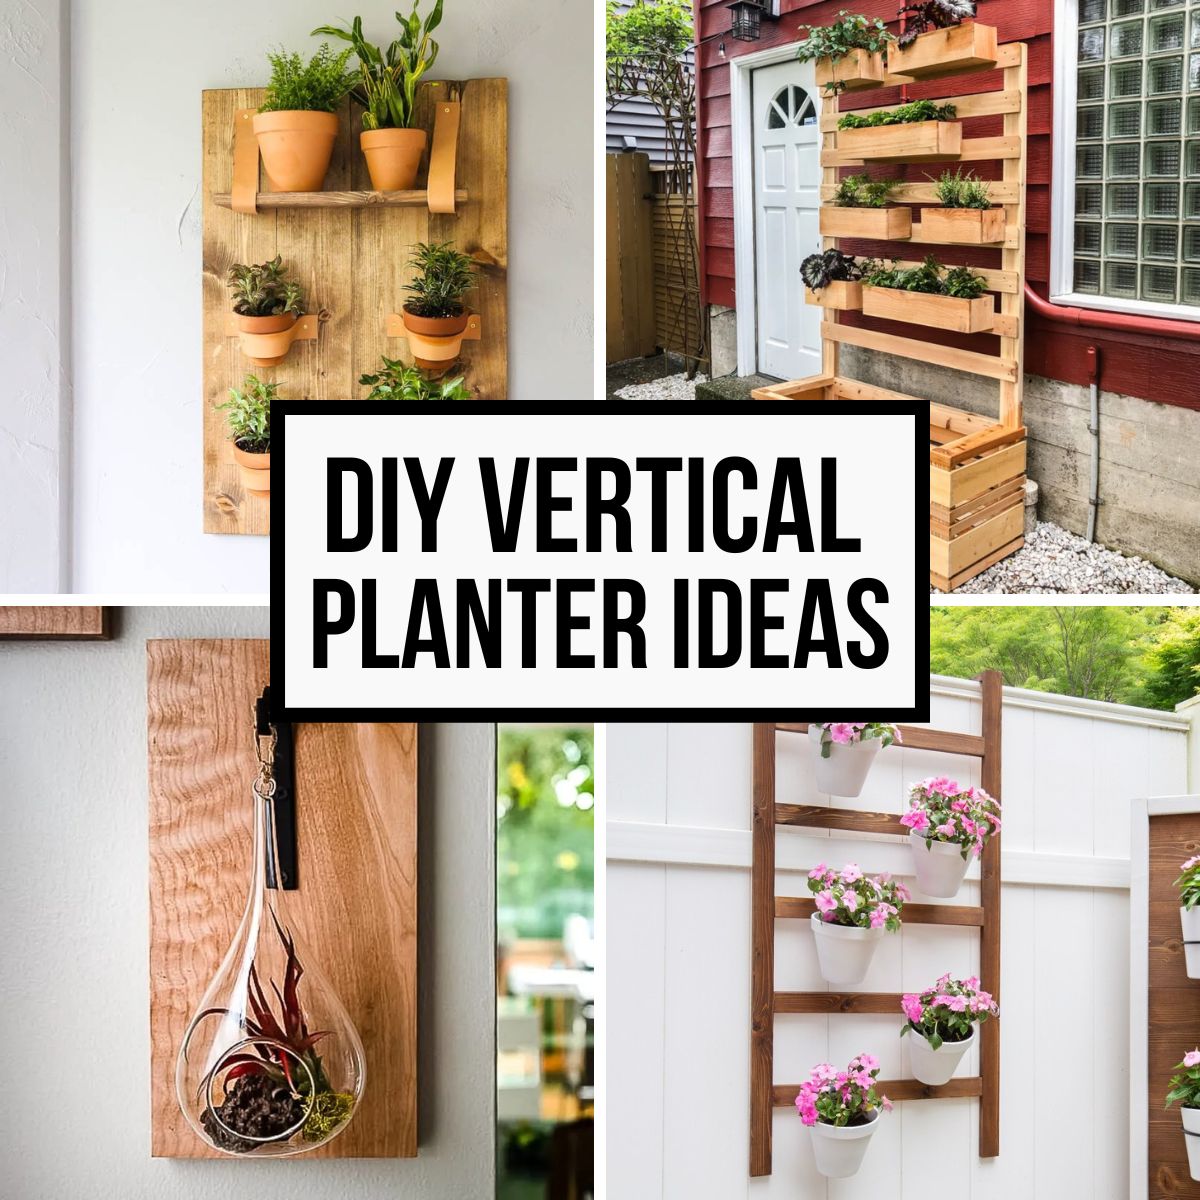 image collage of four vertical planter ideas with text overlay